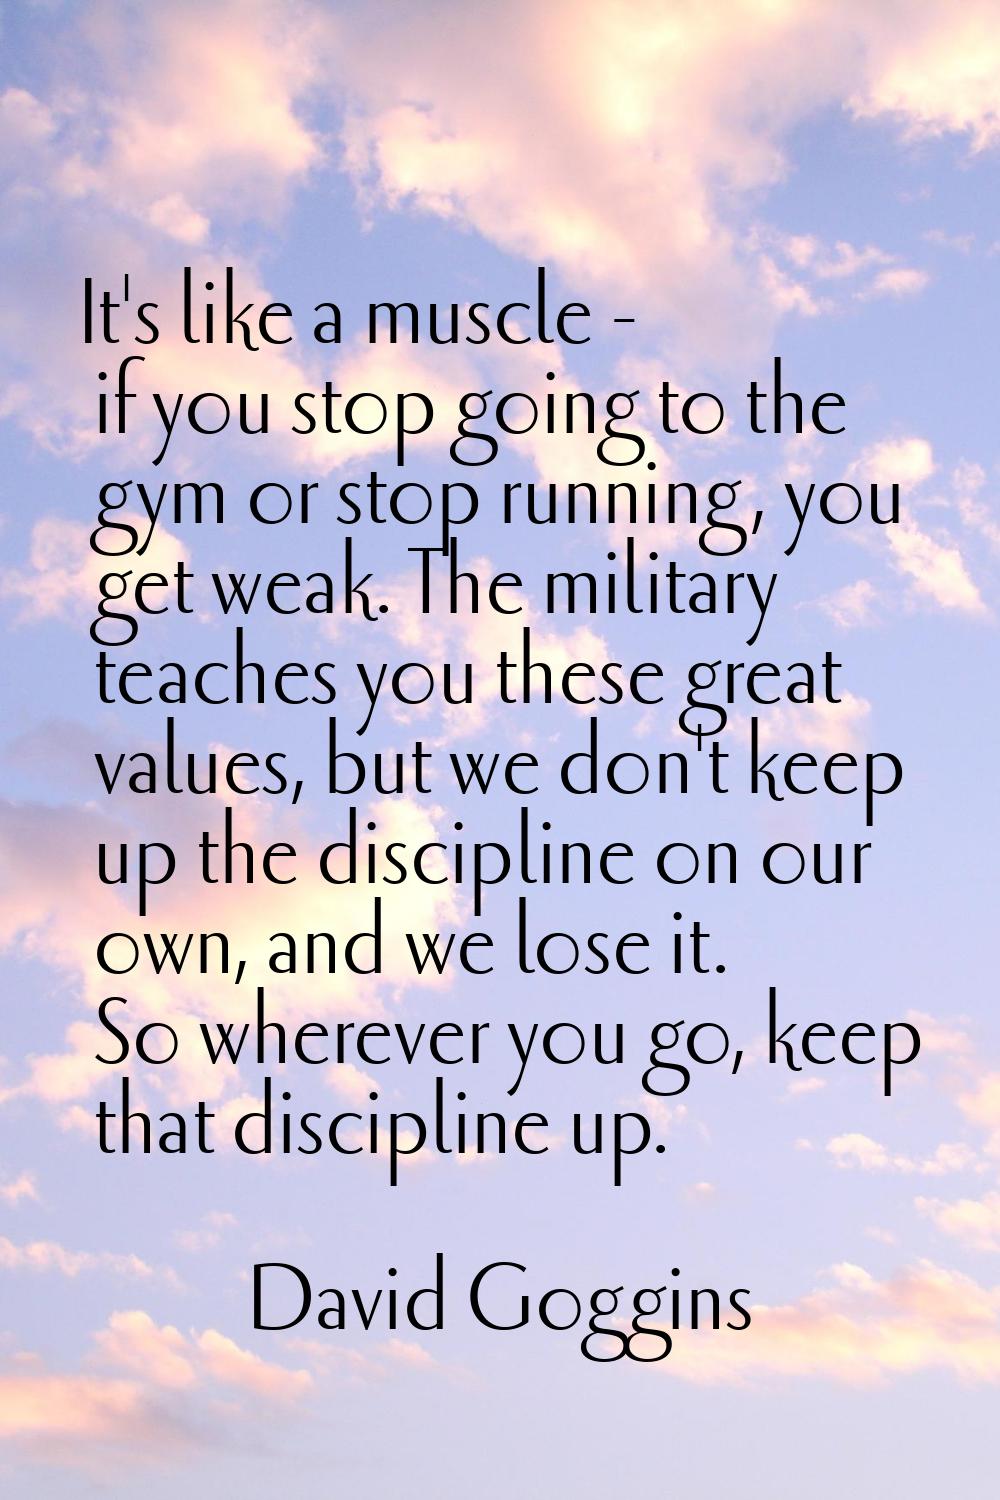 It's like a muscle - if you stop going to the gym or stop running, you get weak. The military teach